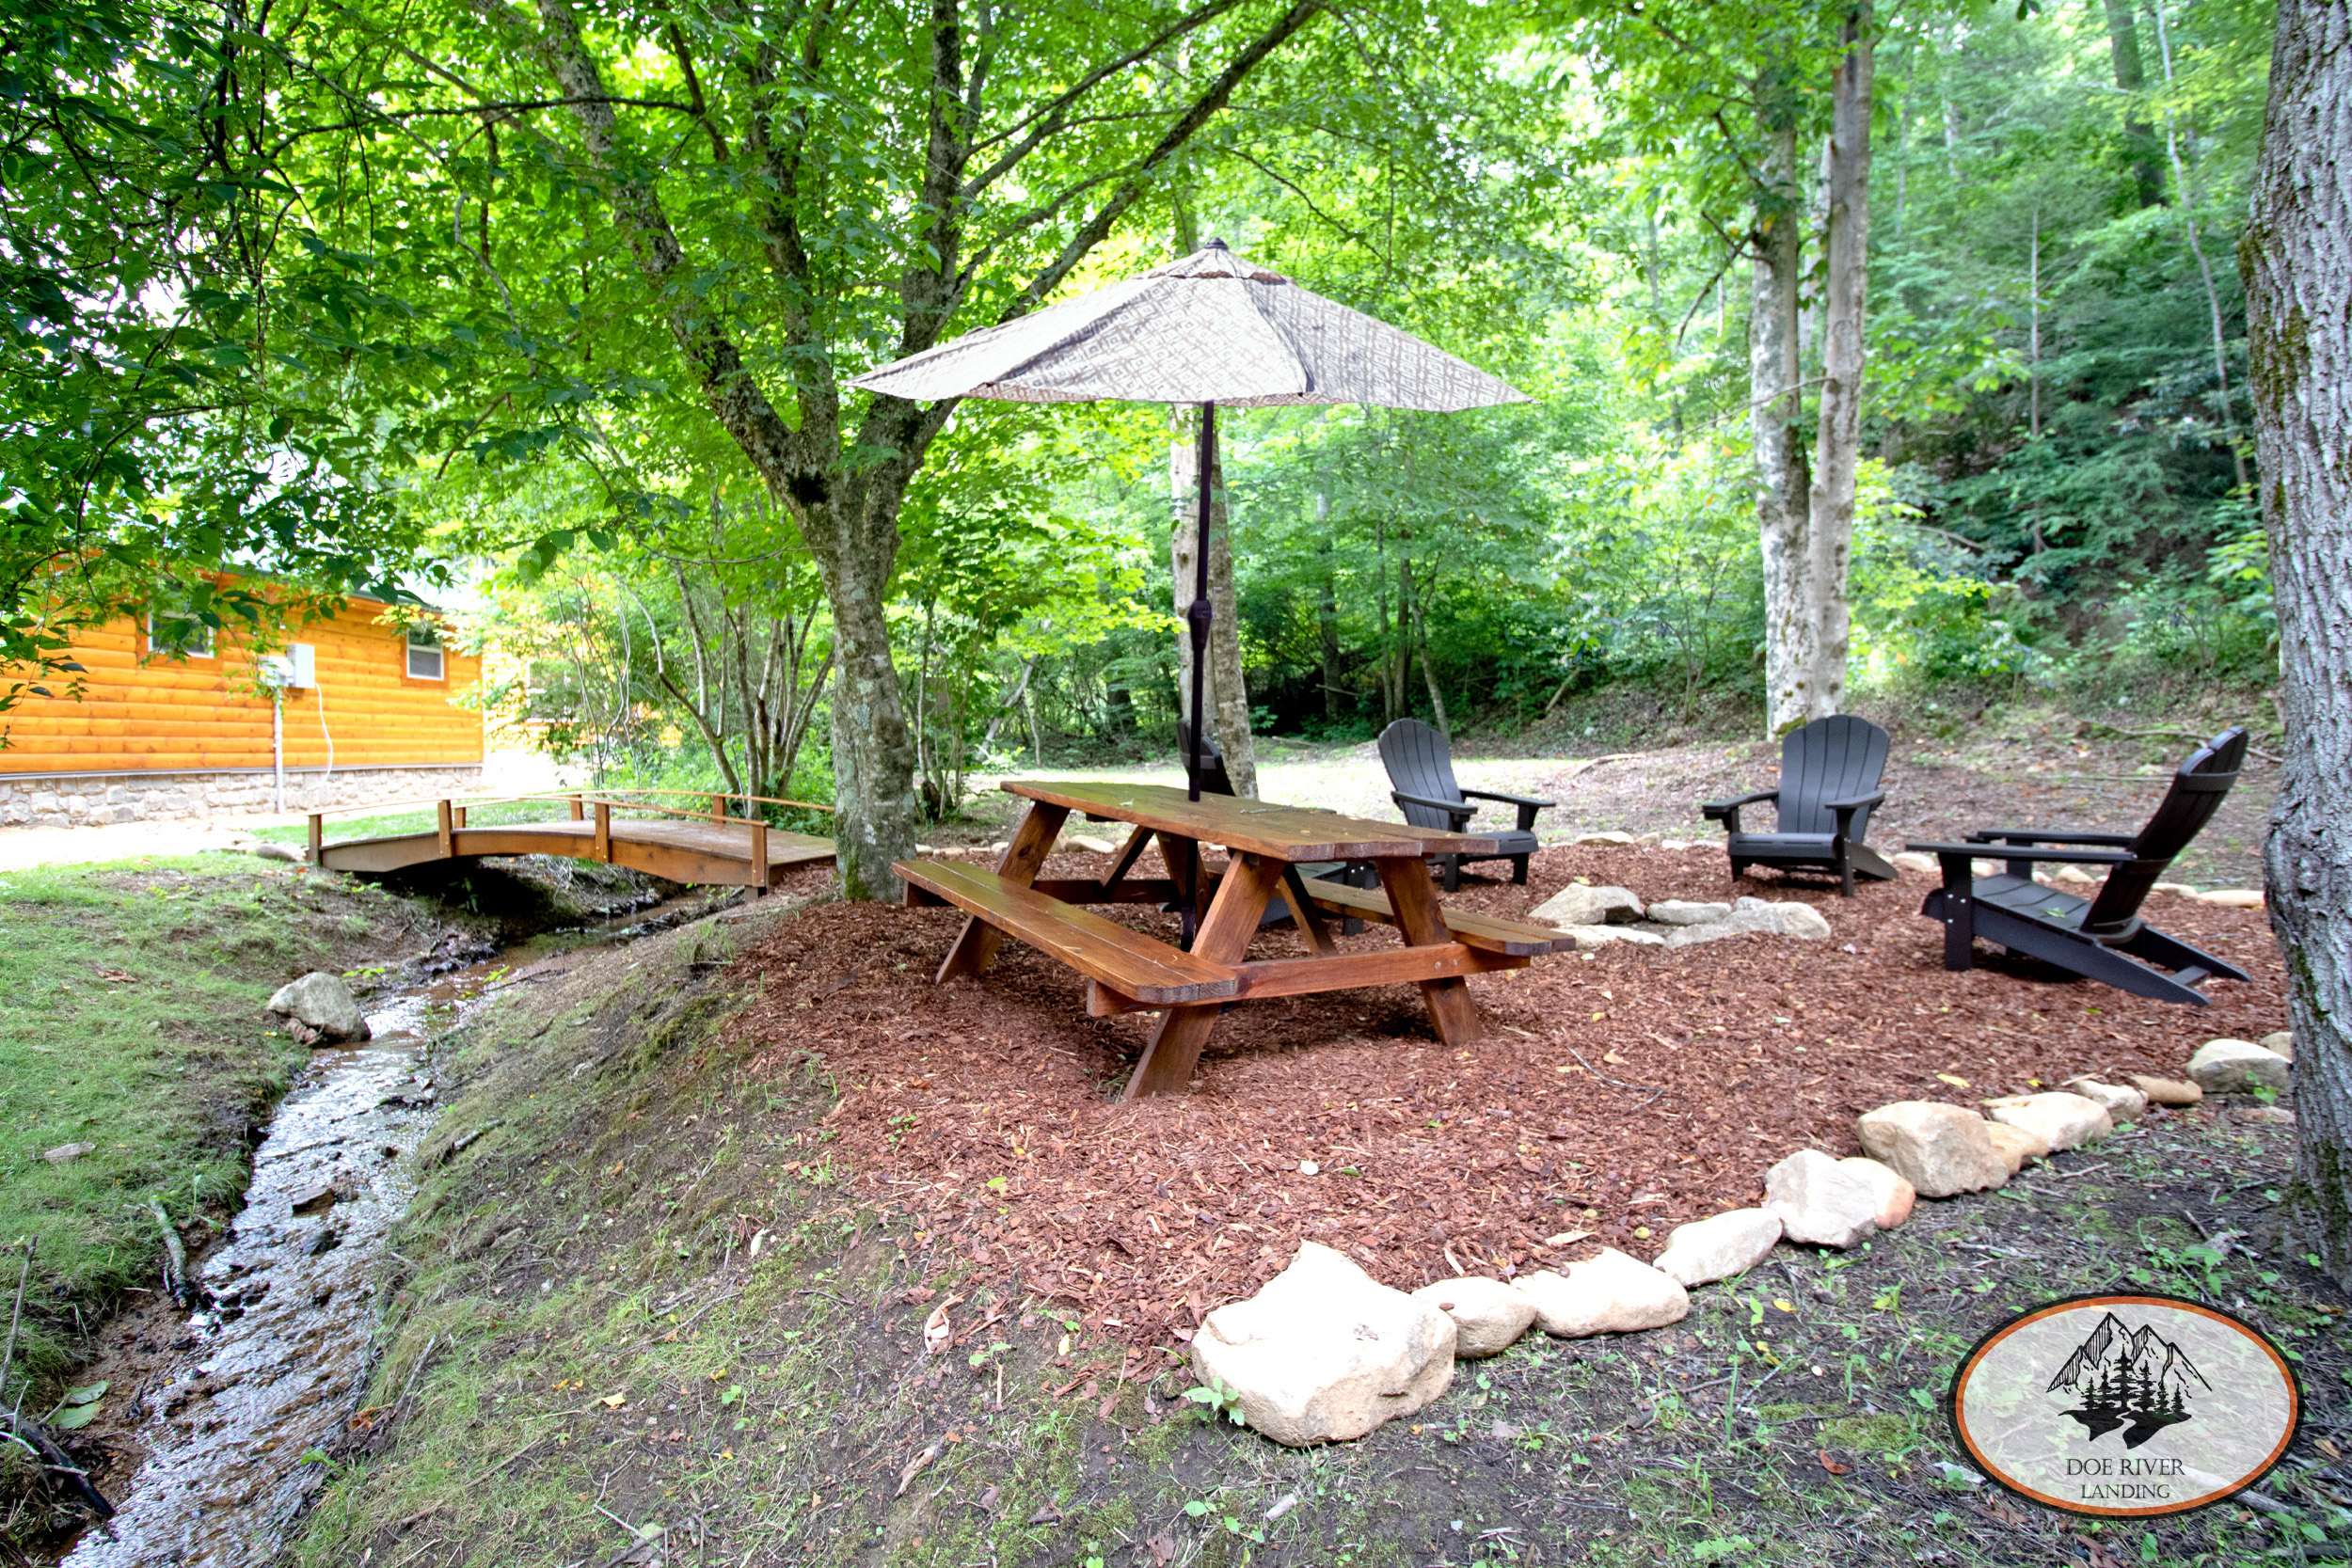 Doe River Landing campground in Roan Mountain, TN. Best vacation rental near Elizabethton, TN and Johnson City TN. Brown Trout Cabin private riverside campsite with fire pit, picnic table, grill, and umbrella.